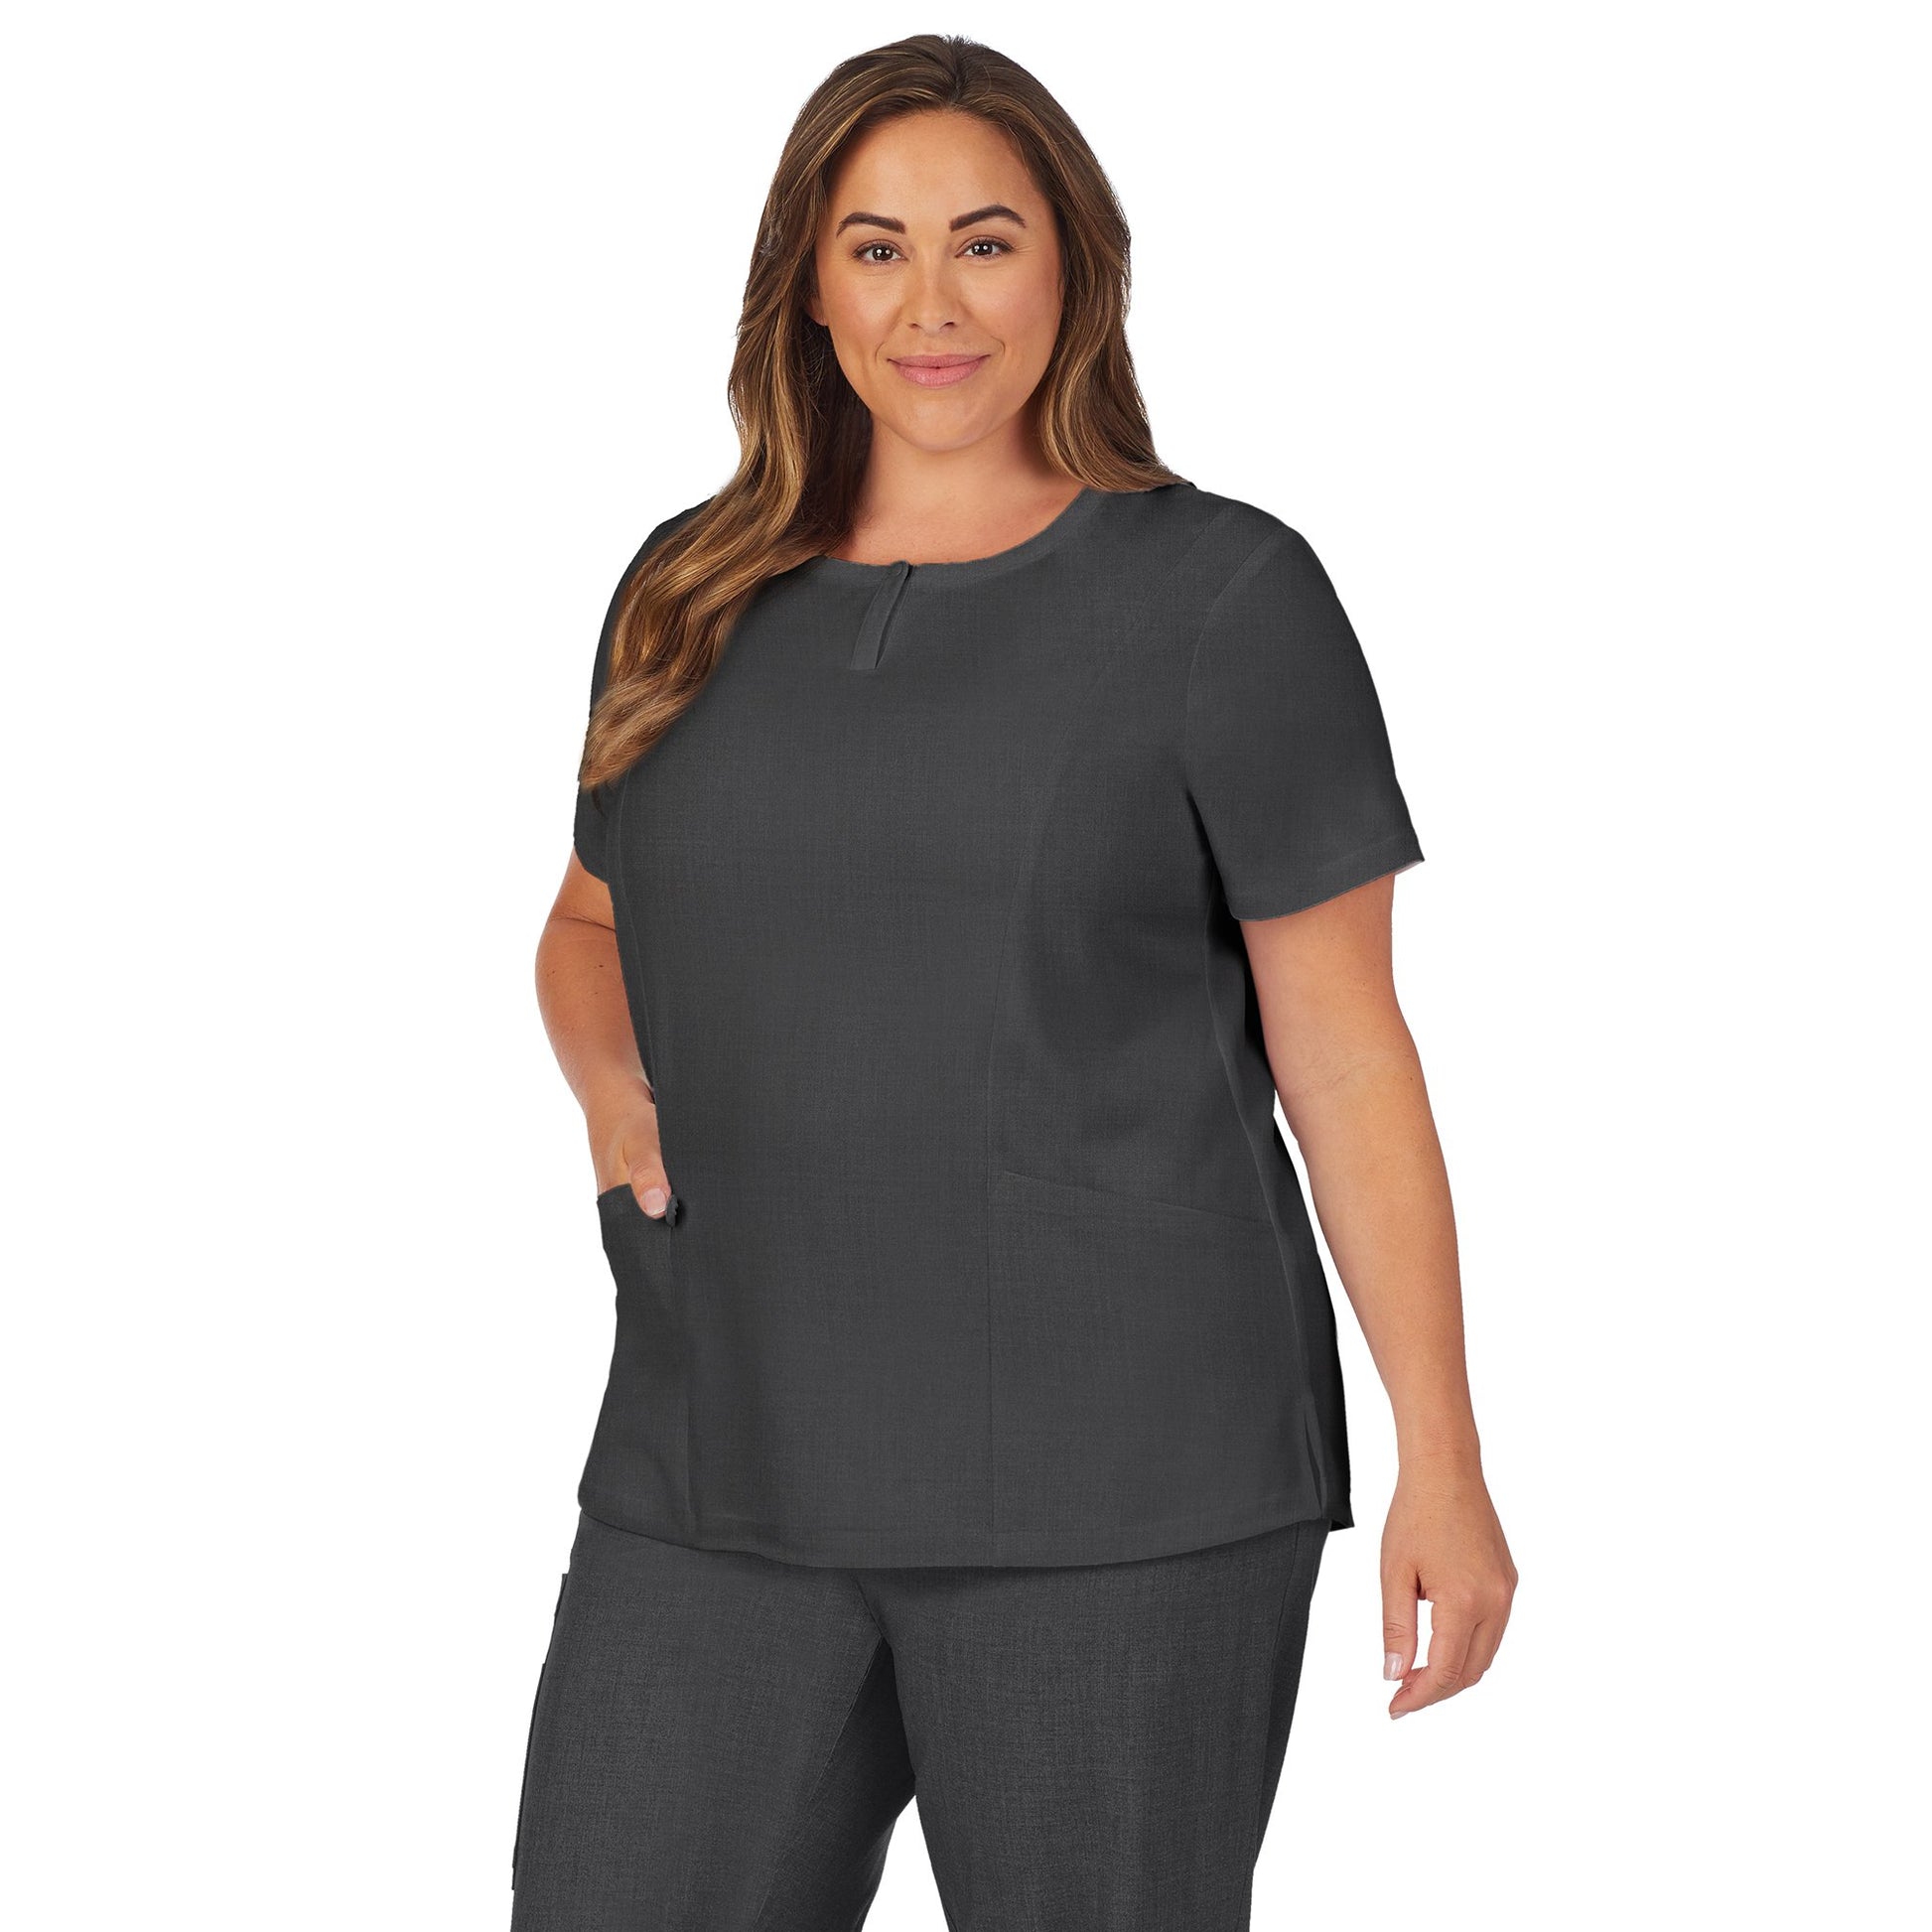 Charcoal Heather;Model is wearing size 1X. She is 5’9.5”, Bust 43”, Waist 37”, Hips 49.5”.@A lady wearing charcoal heather scrub henley neck top with side pockets plus.